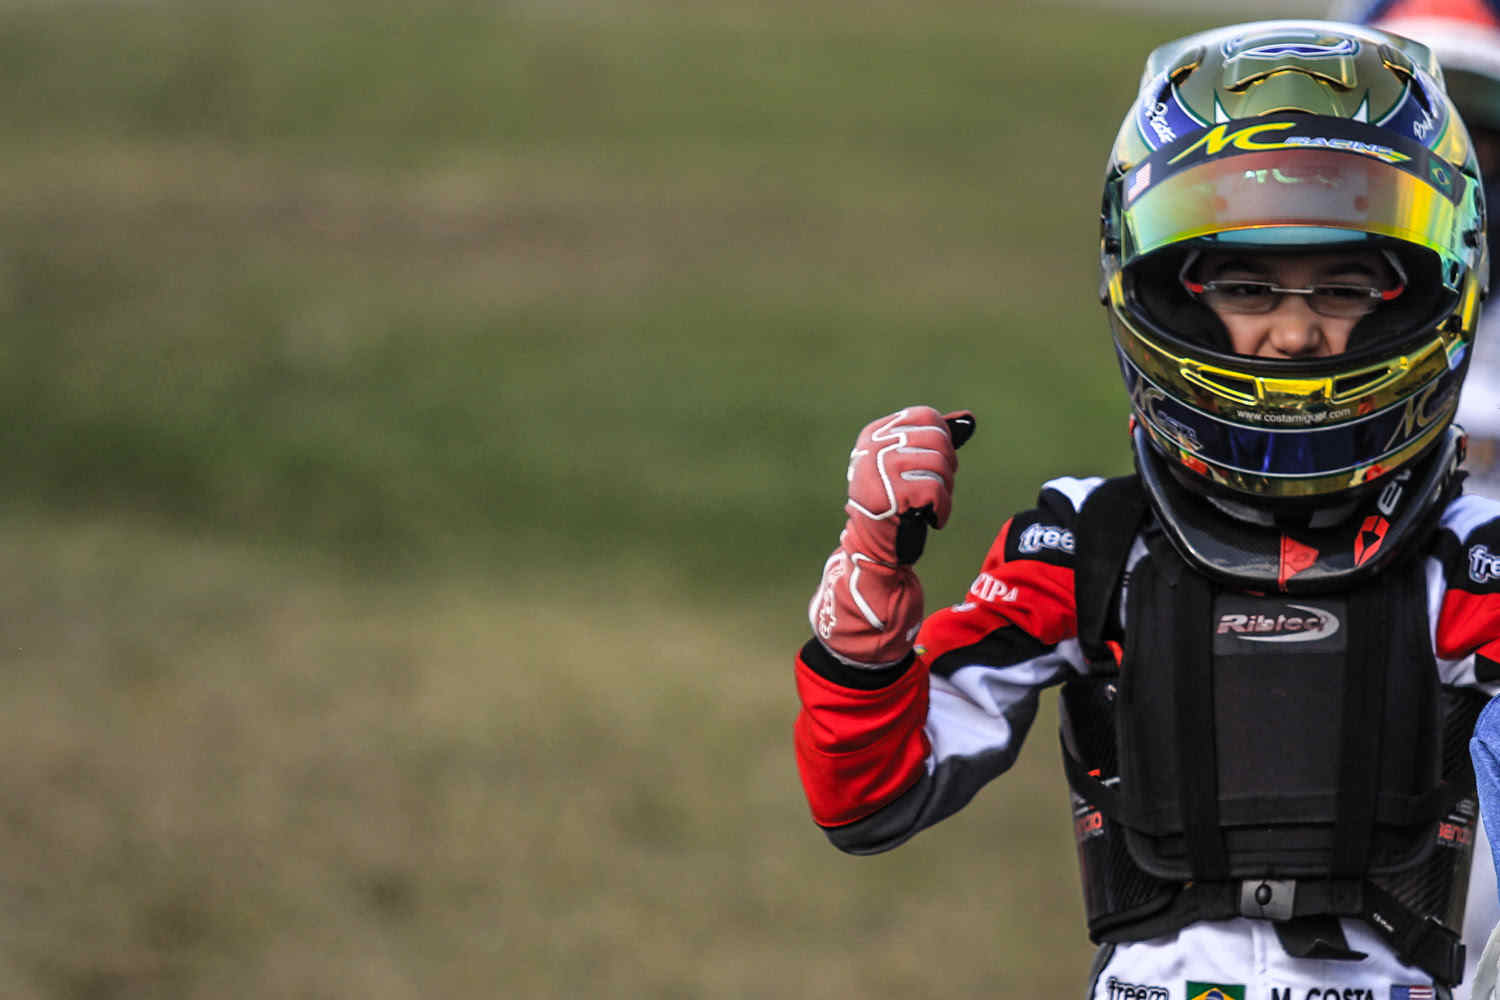 Justin Aresenau, drove one of the most exciting races of the weekend in Mini Max